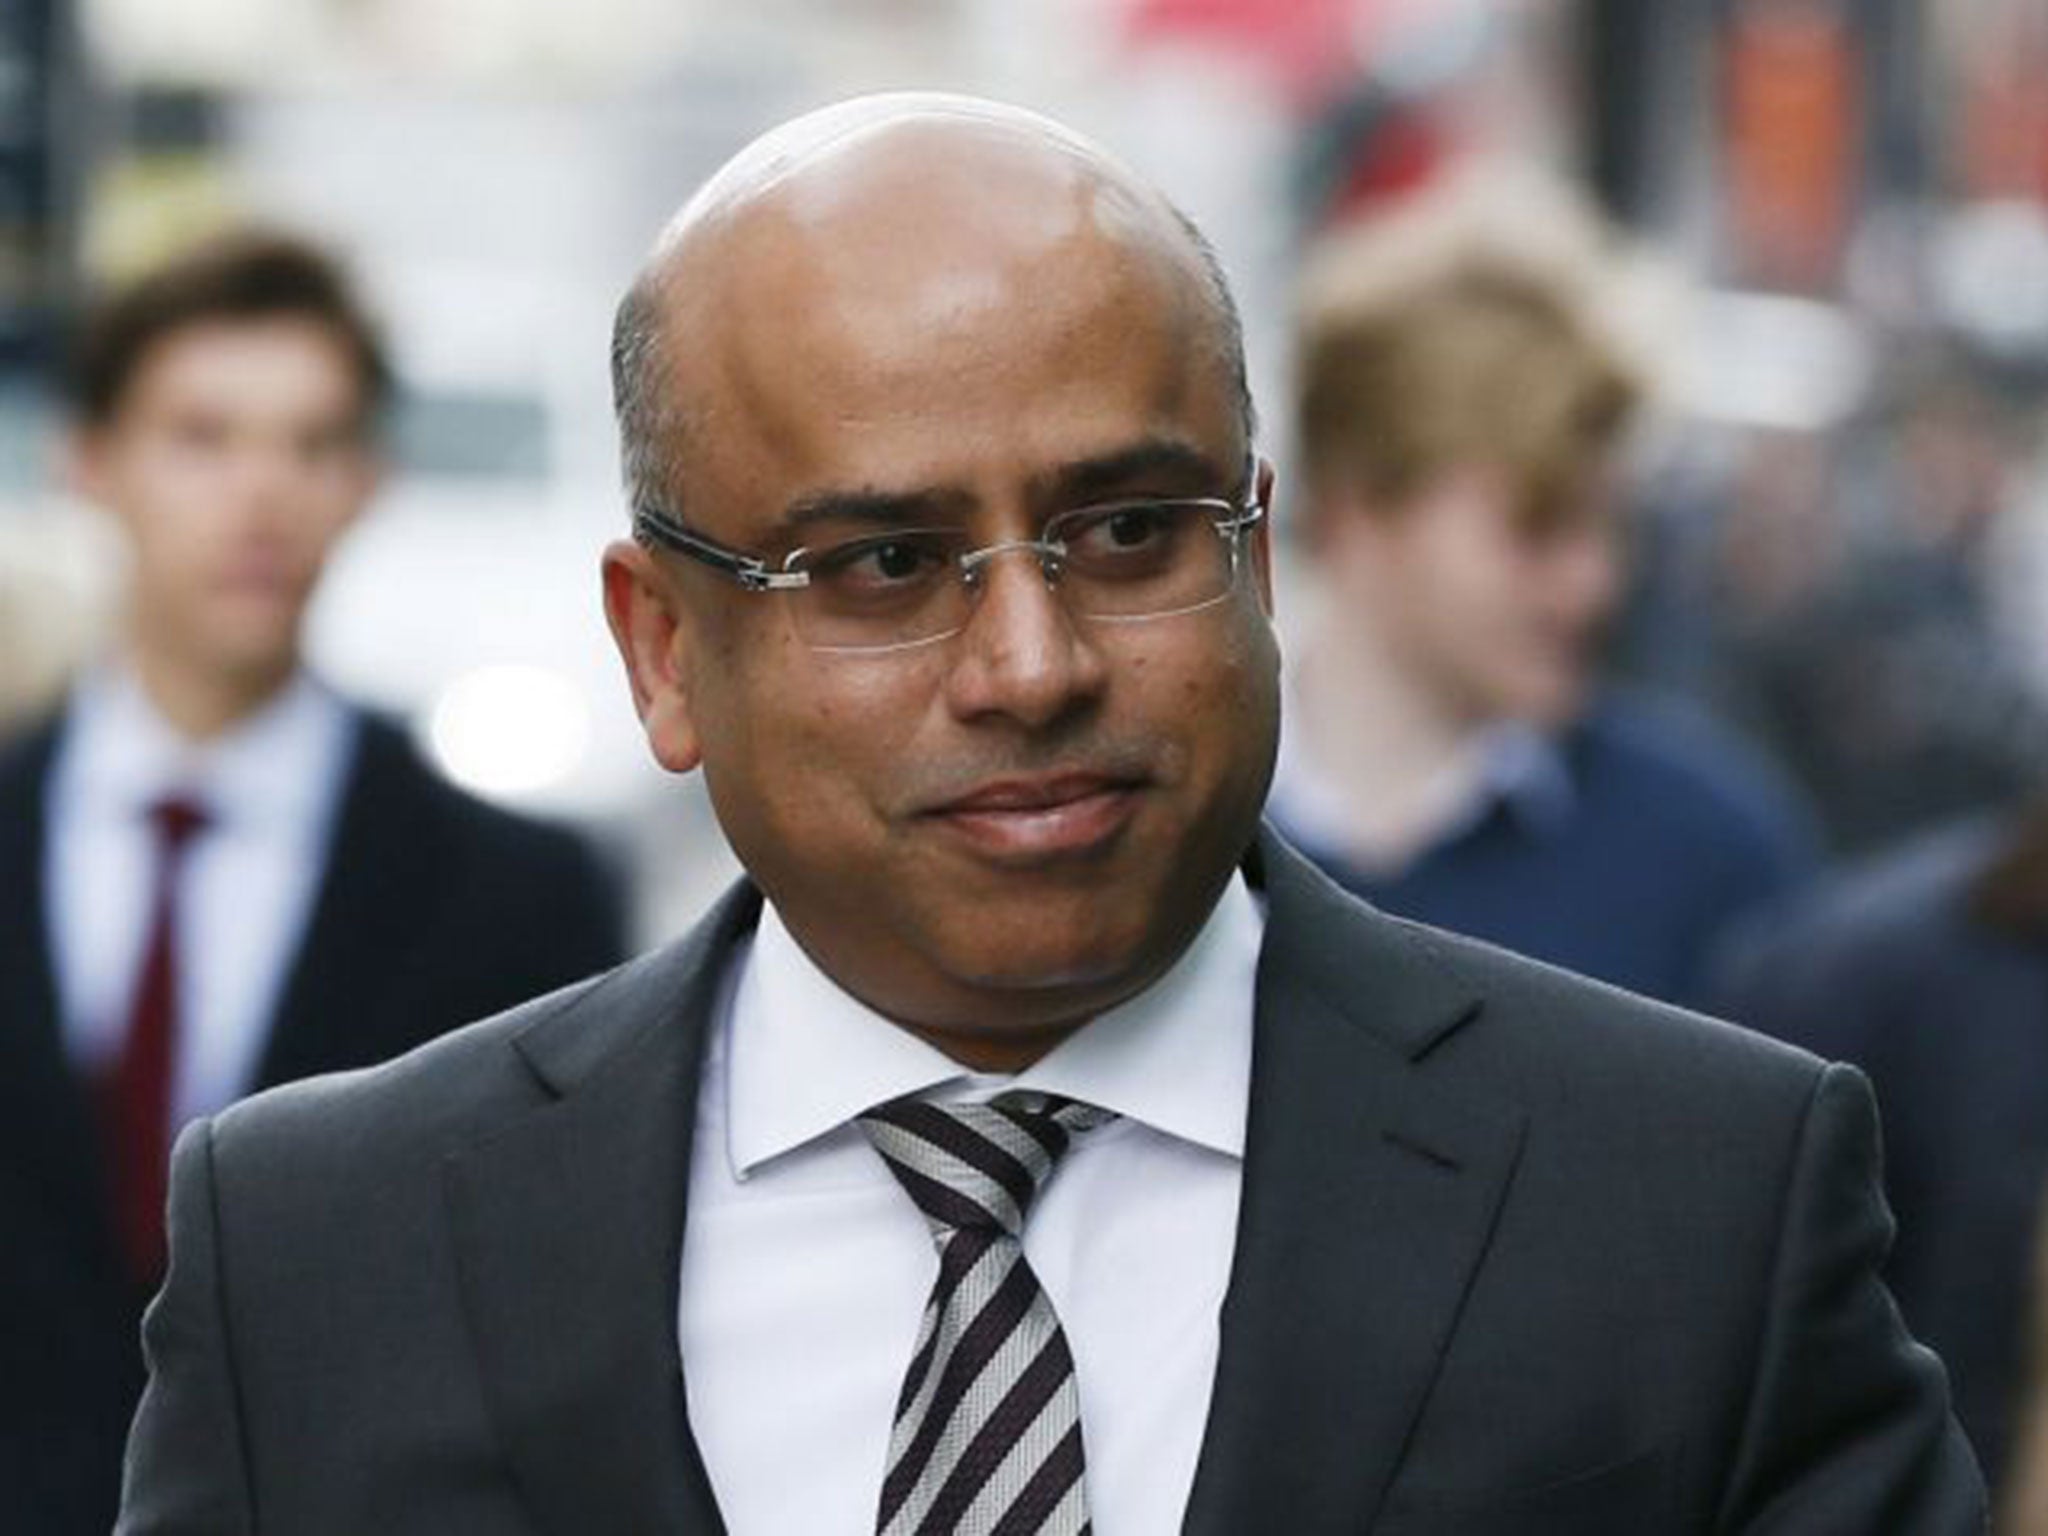 Steel magnate Sanjeev Gupta will proceed with caution in his talks with Tata